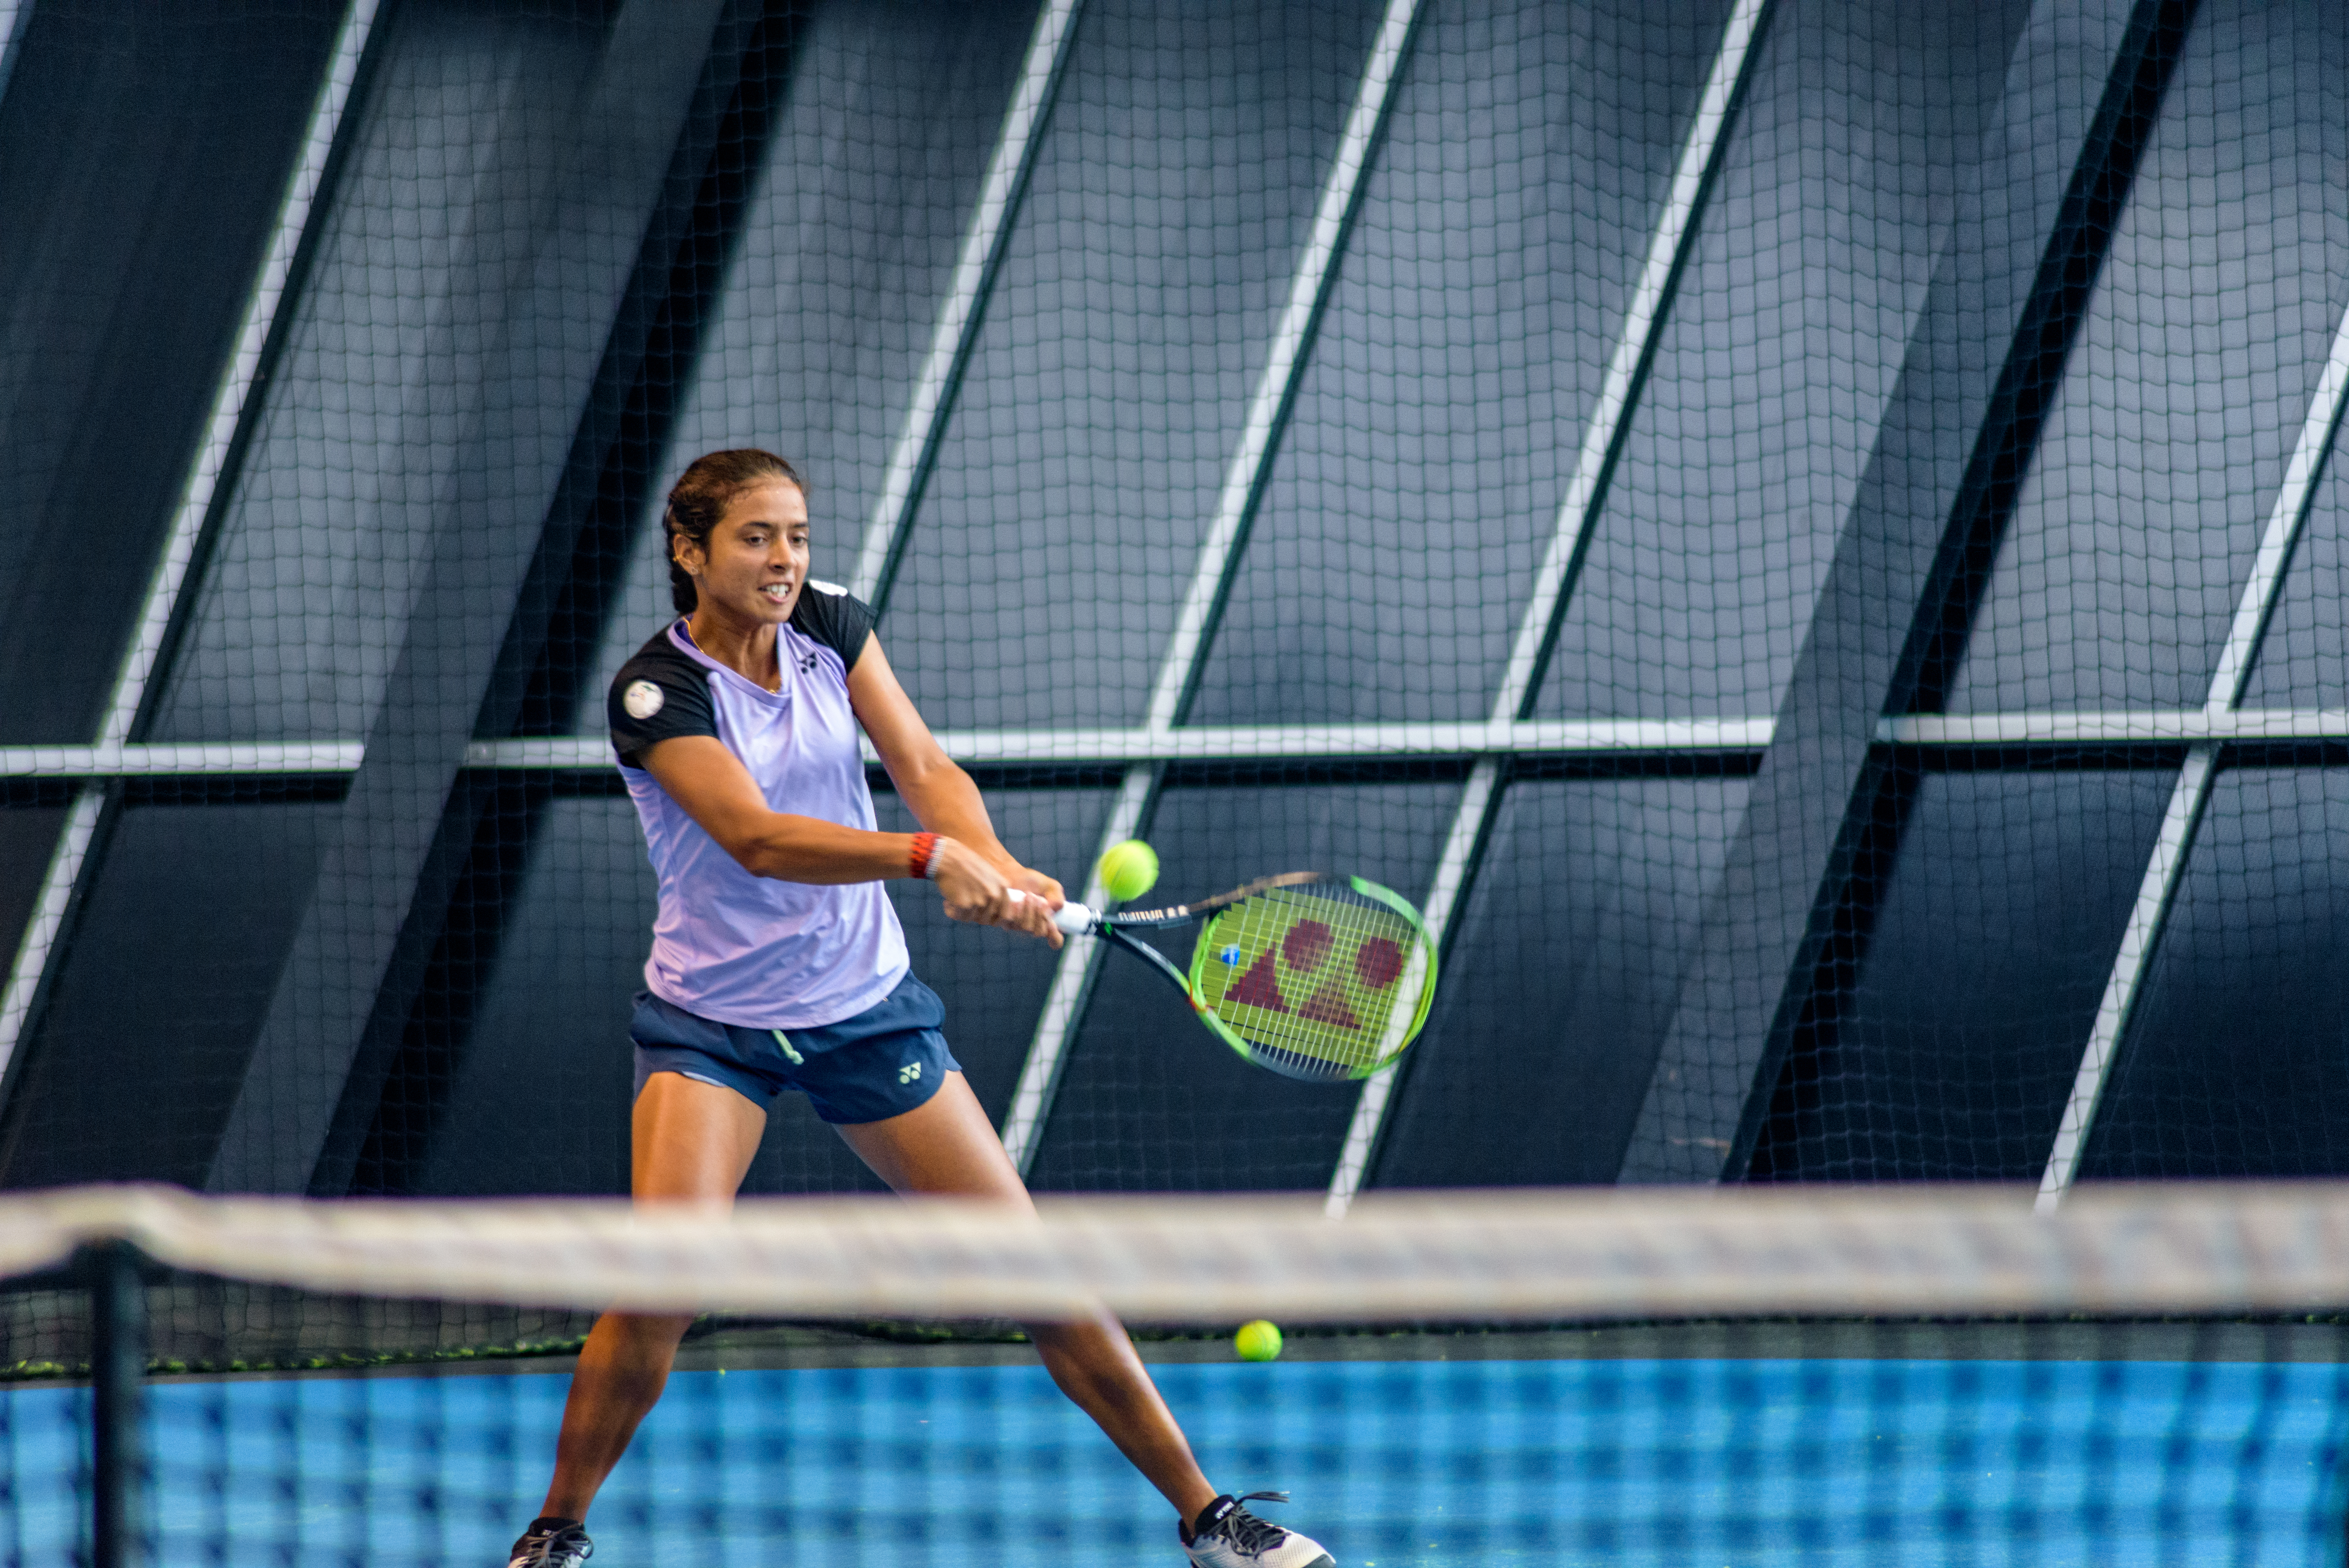 Australian Open 2020 Day 0 : Photos from practice at Melbourne Park